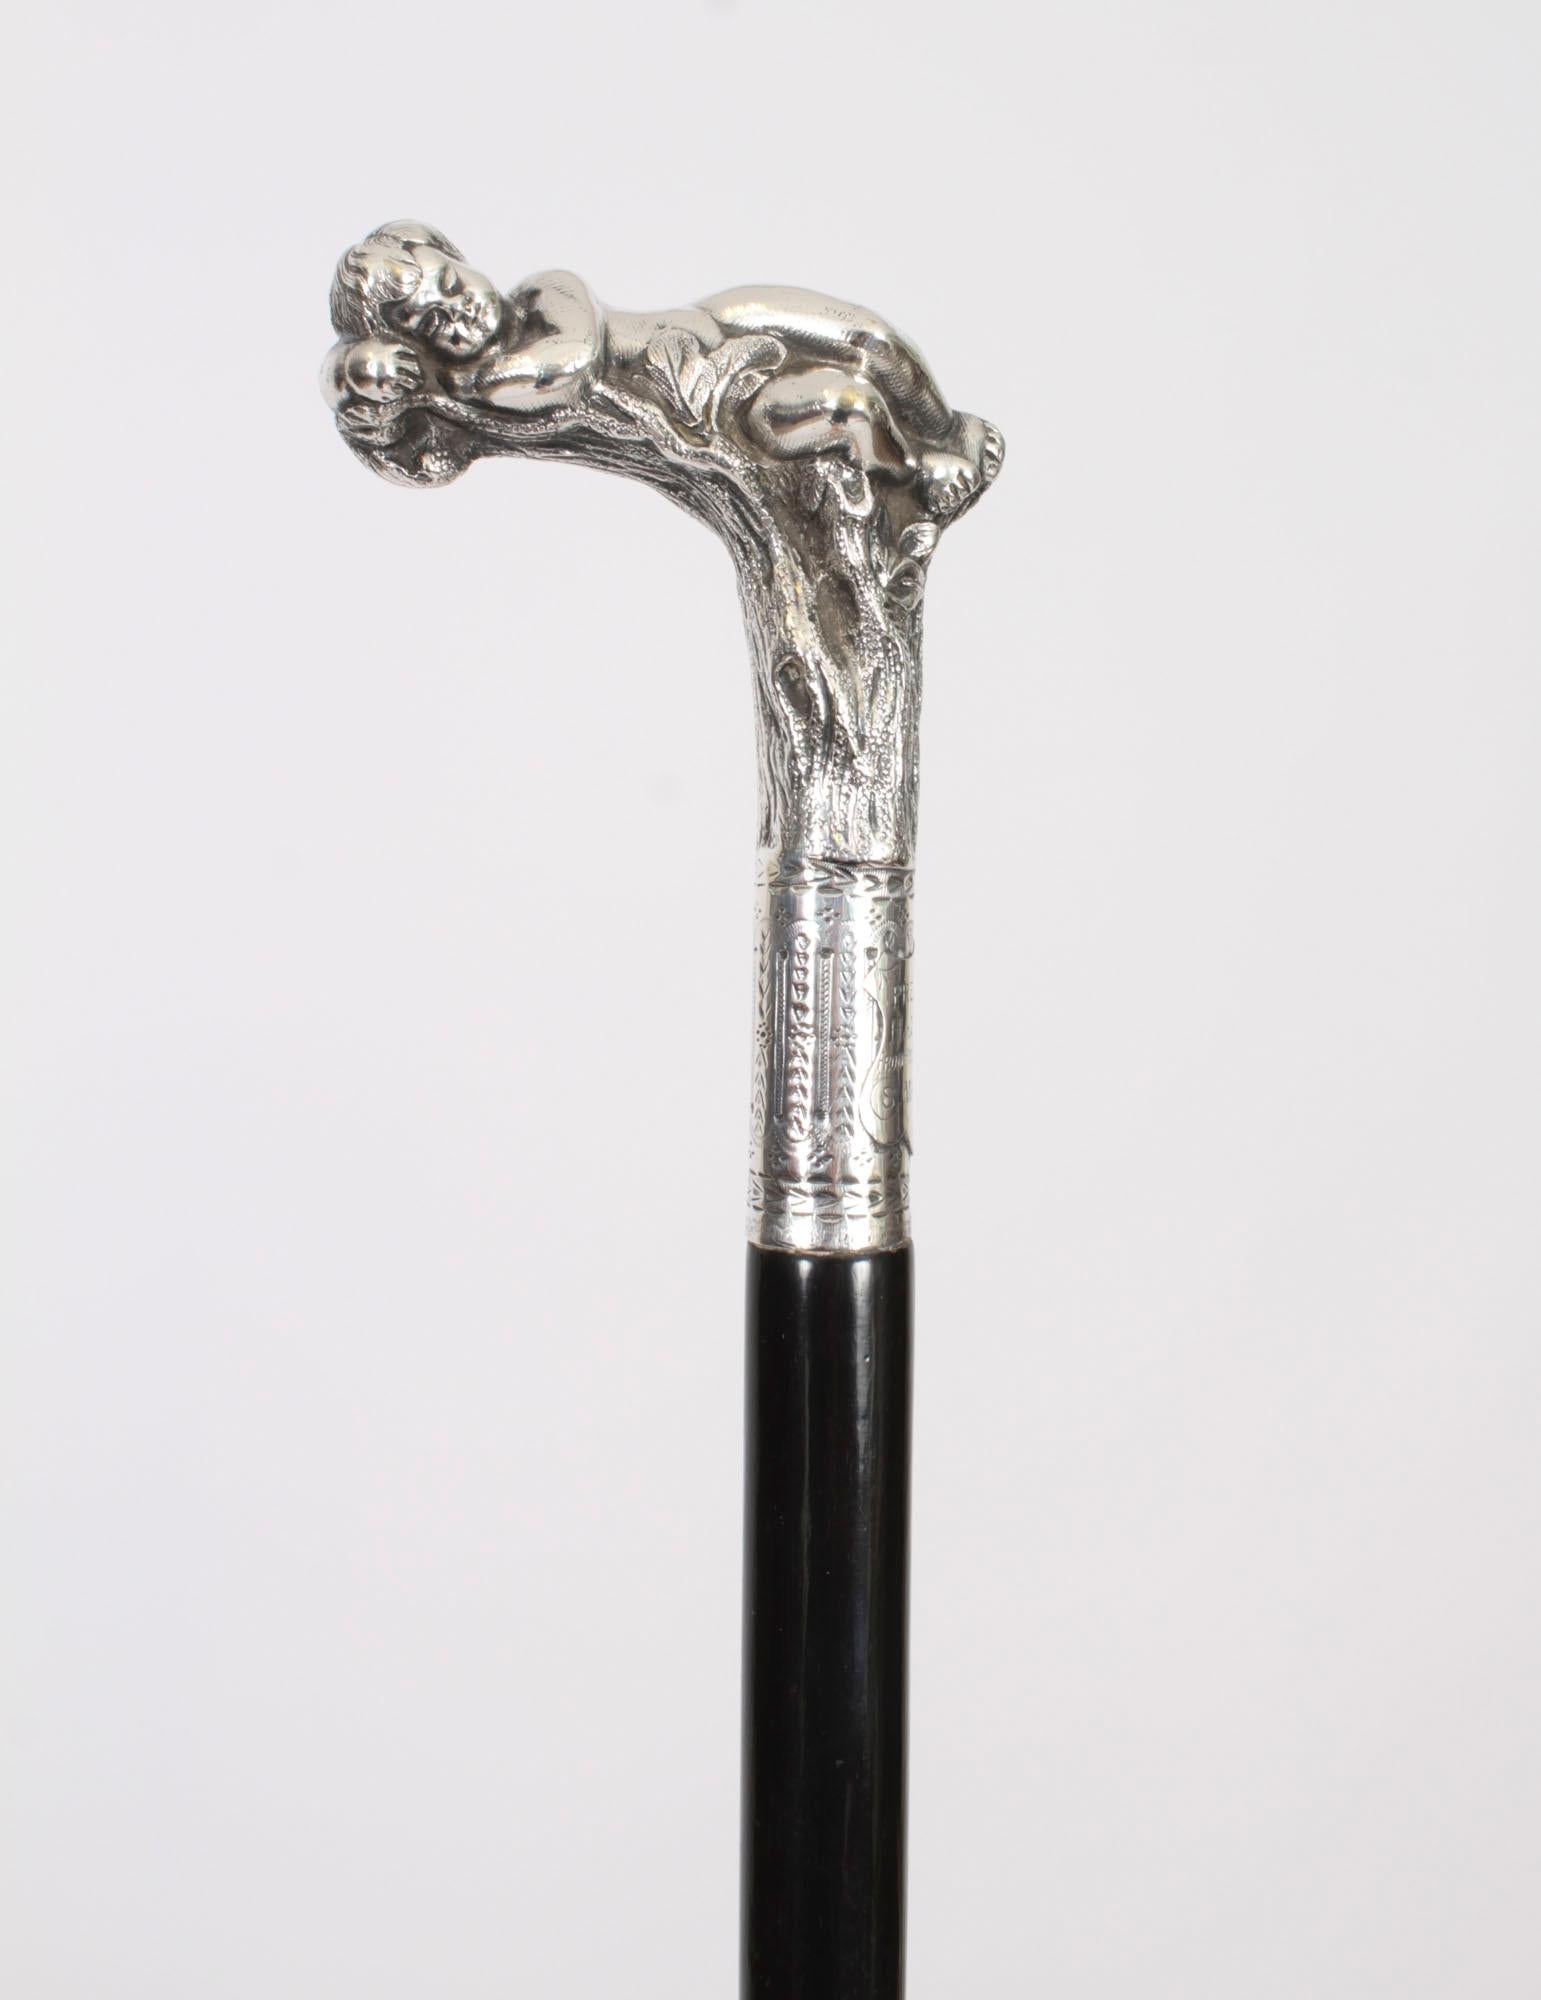 This is a beautiful antique Victorian novelty silver pommel and ebonised shaft walking stick, dated 1890.

This decorative walking cane features a naturalistically sleeping cupid on a branch with a bright cut collar with shield shaped reserve and